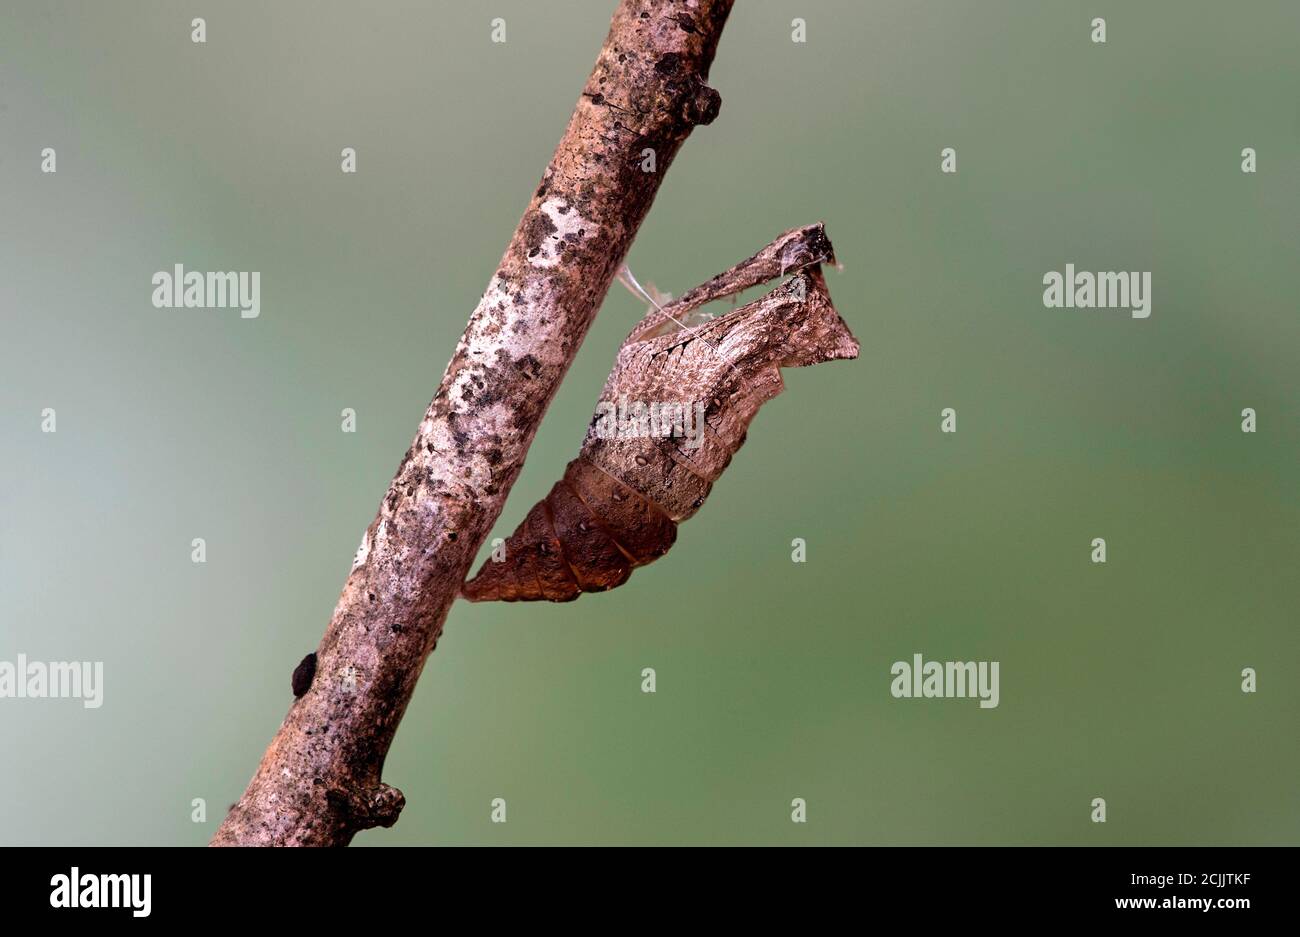 Shell of an empty girdled pupa after eclosion of an Old World Swallowtail (Papilio machaon), Switzerland Stock Photo